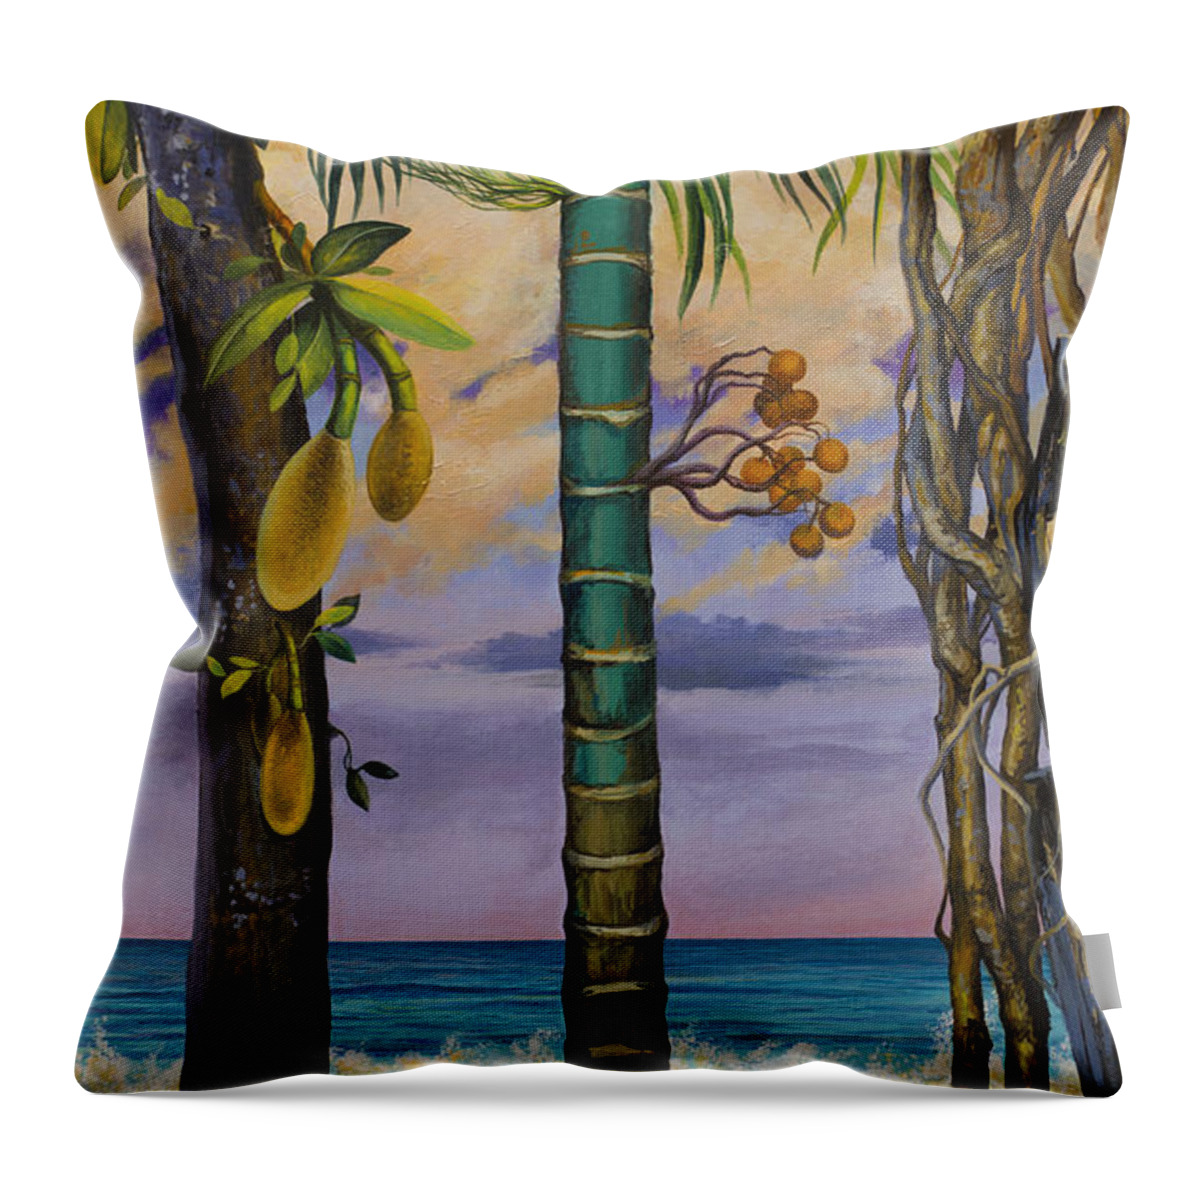 Banana Throw Pillow featuring the painting Banana country by Vrindavan Das